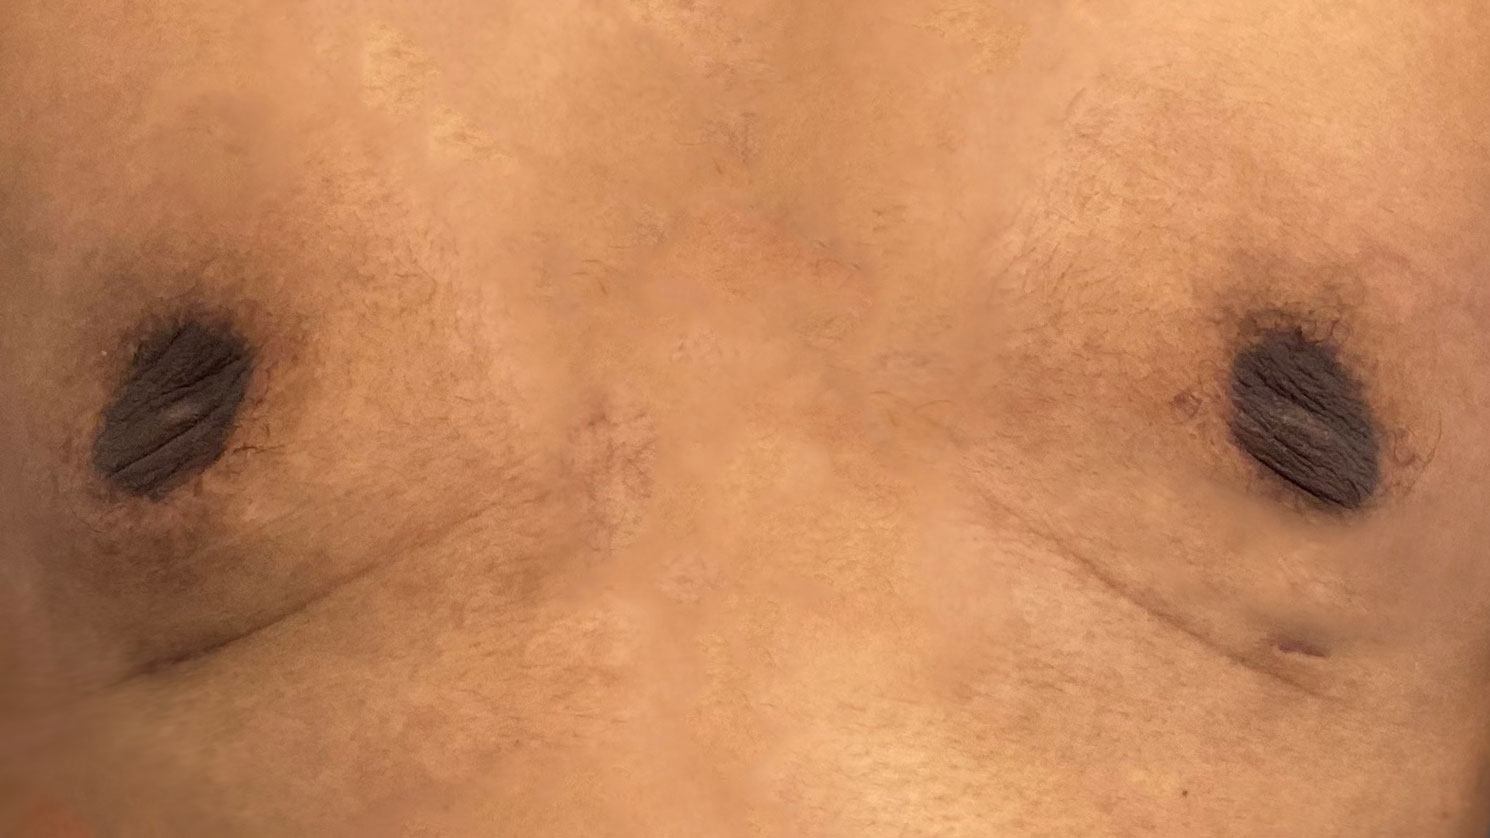 Male patient after gynecomastia treatment.